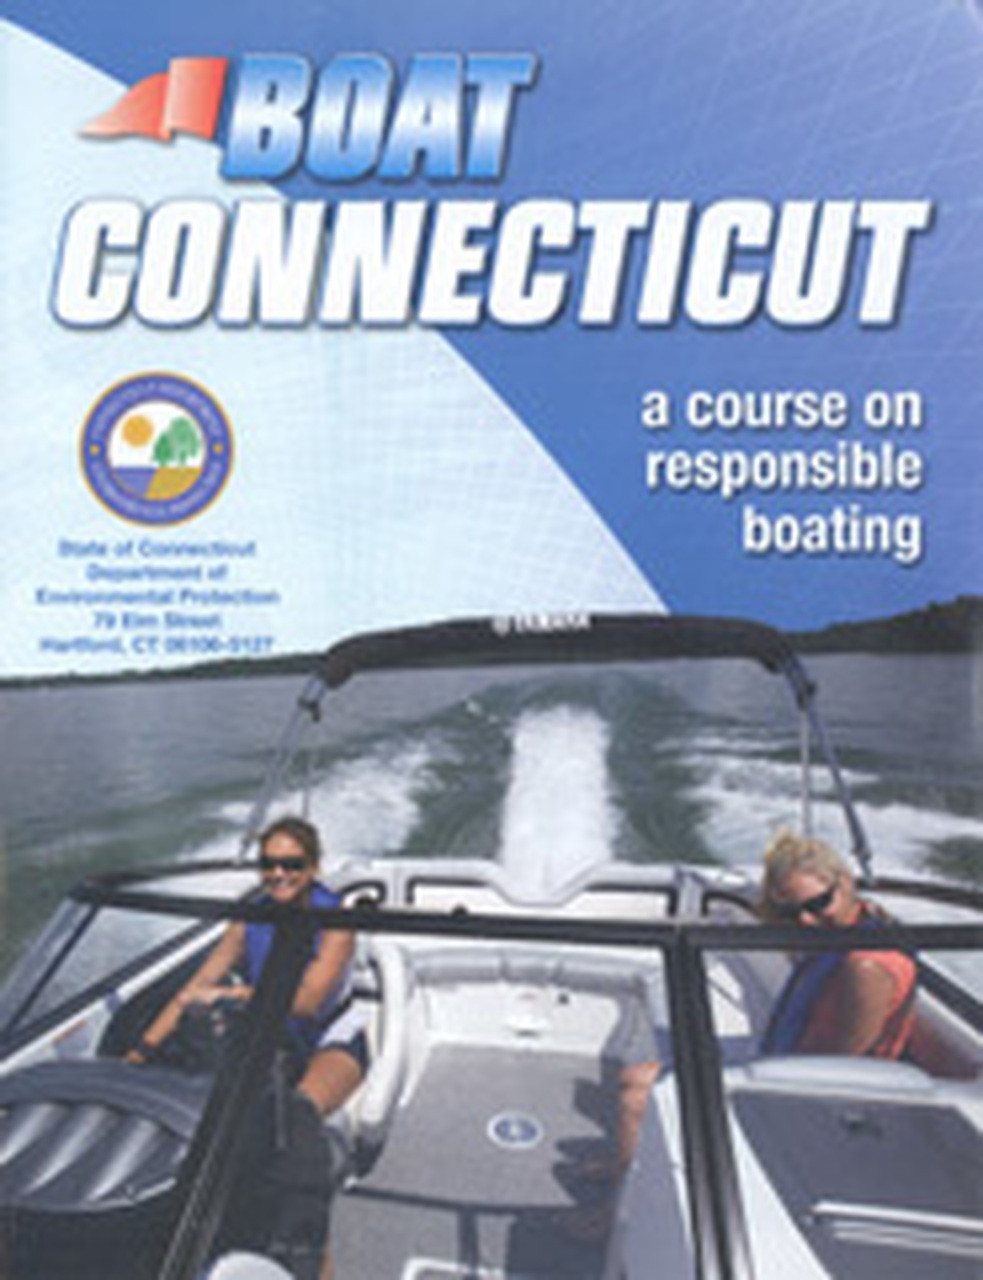 CT Boating & PWC Class, July 2, 2022, 9AM-5PM in E. Hartford, CT